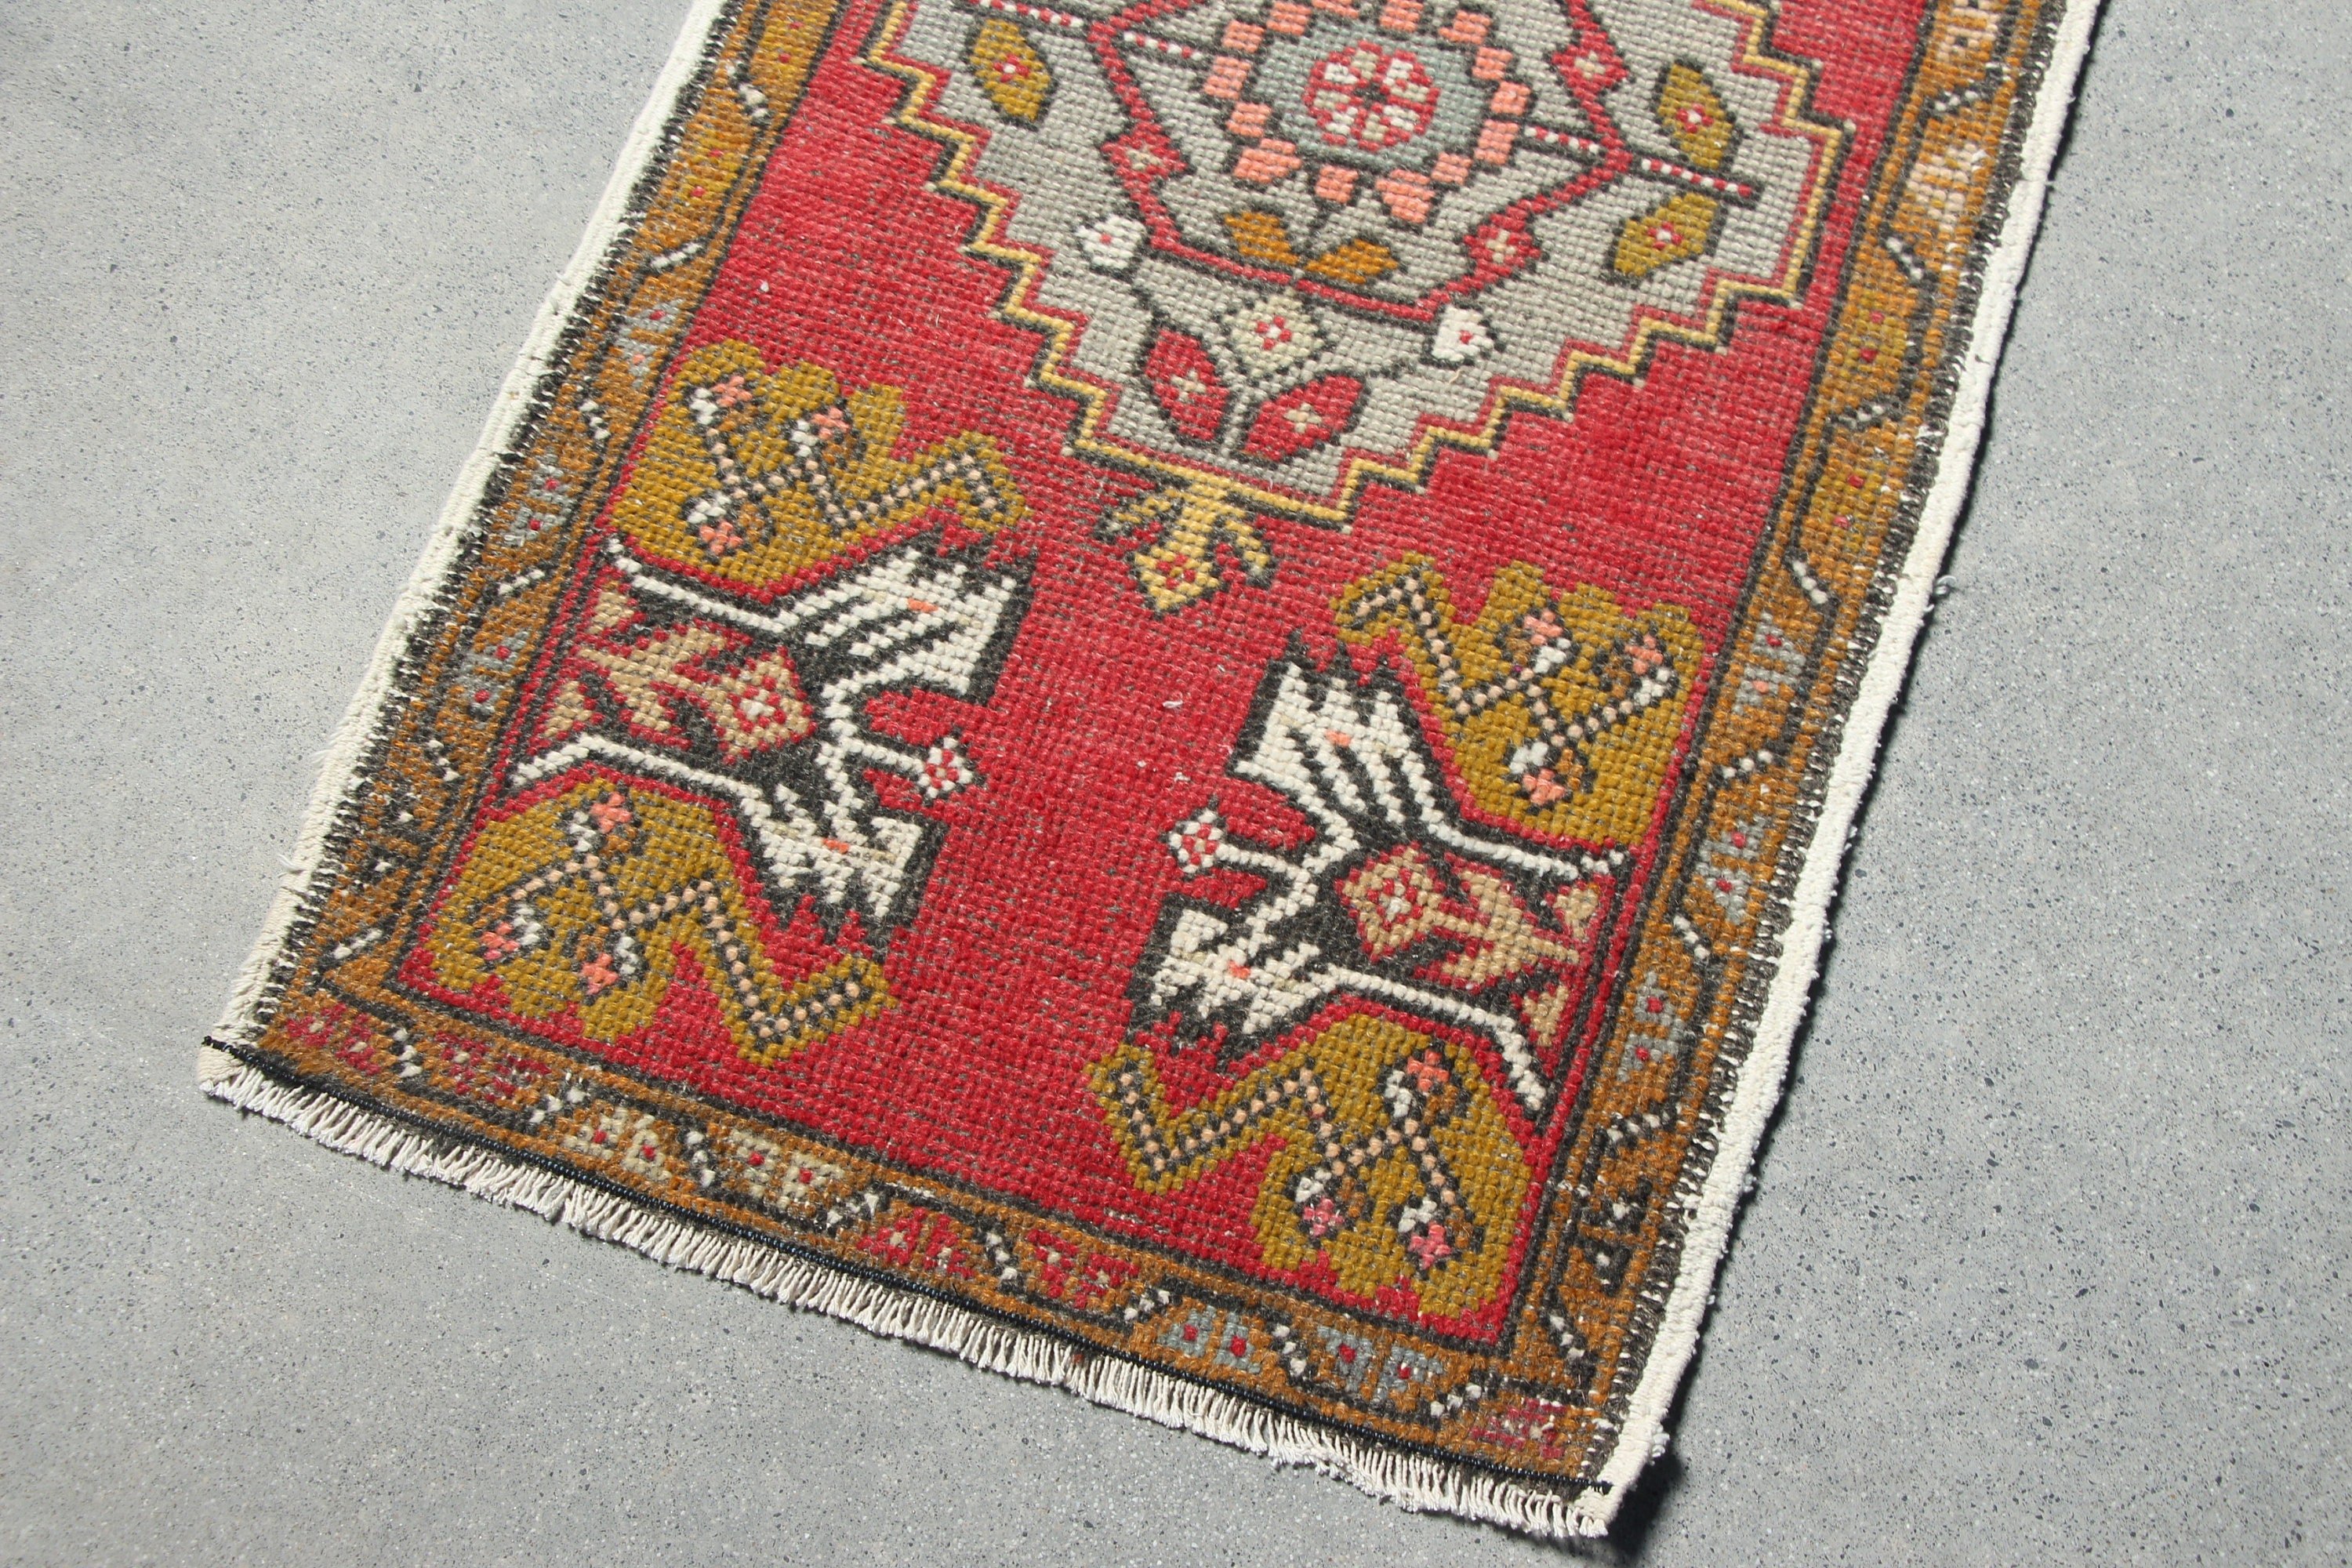 Red Moroccan Rugs, Bathroom Rugs, Tribal Rug, Turkish Rugs, Vintage Rug, Antique Rug, Rugs for Bathroom, 1.9x3.3 ft Small Rug, Kitchen Rug